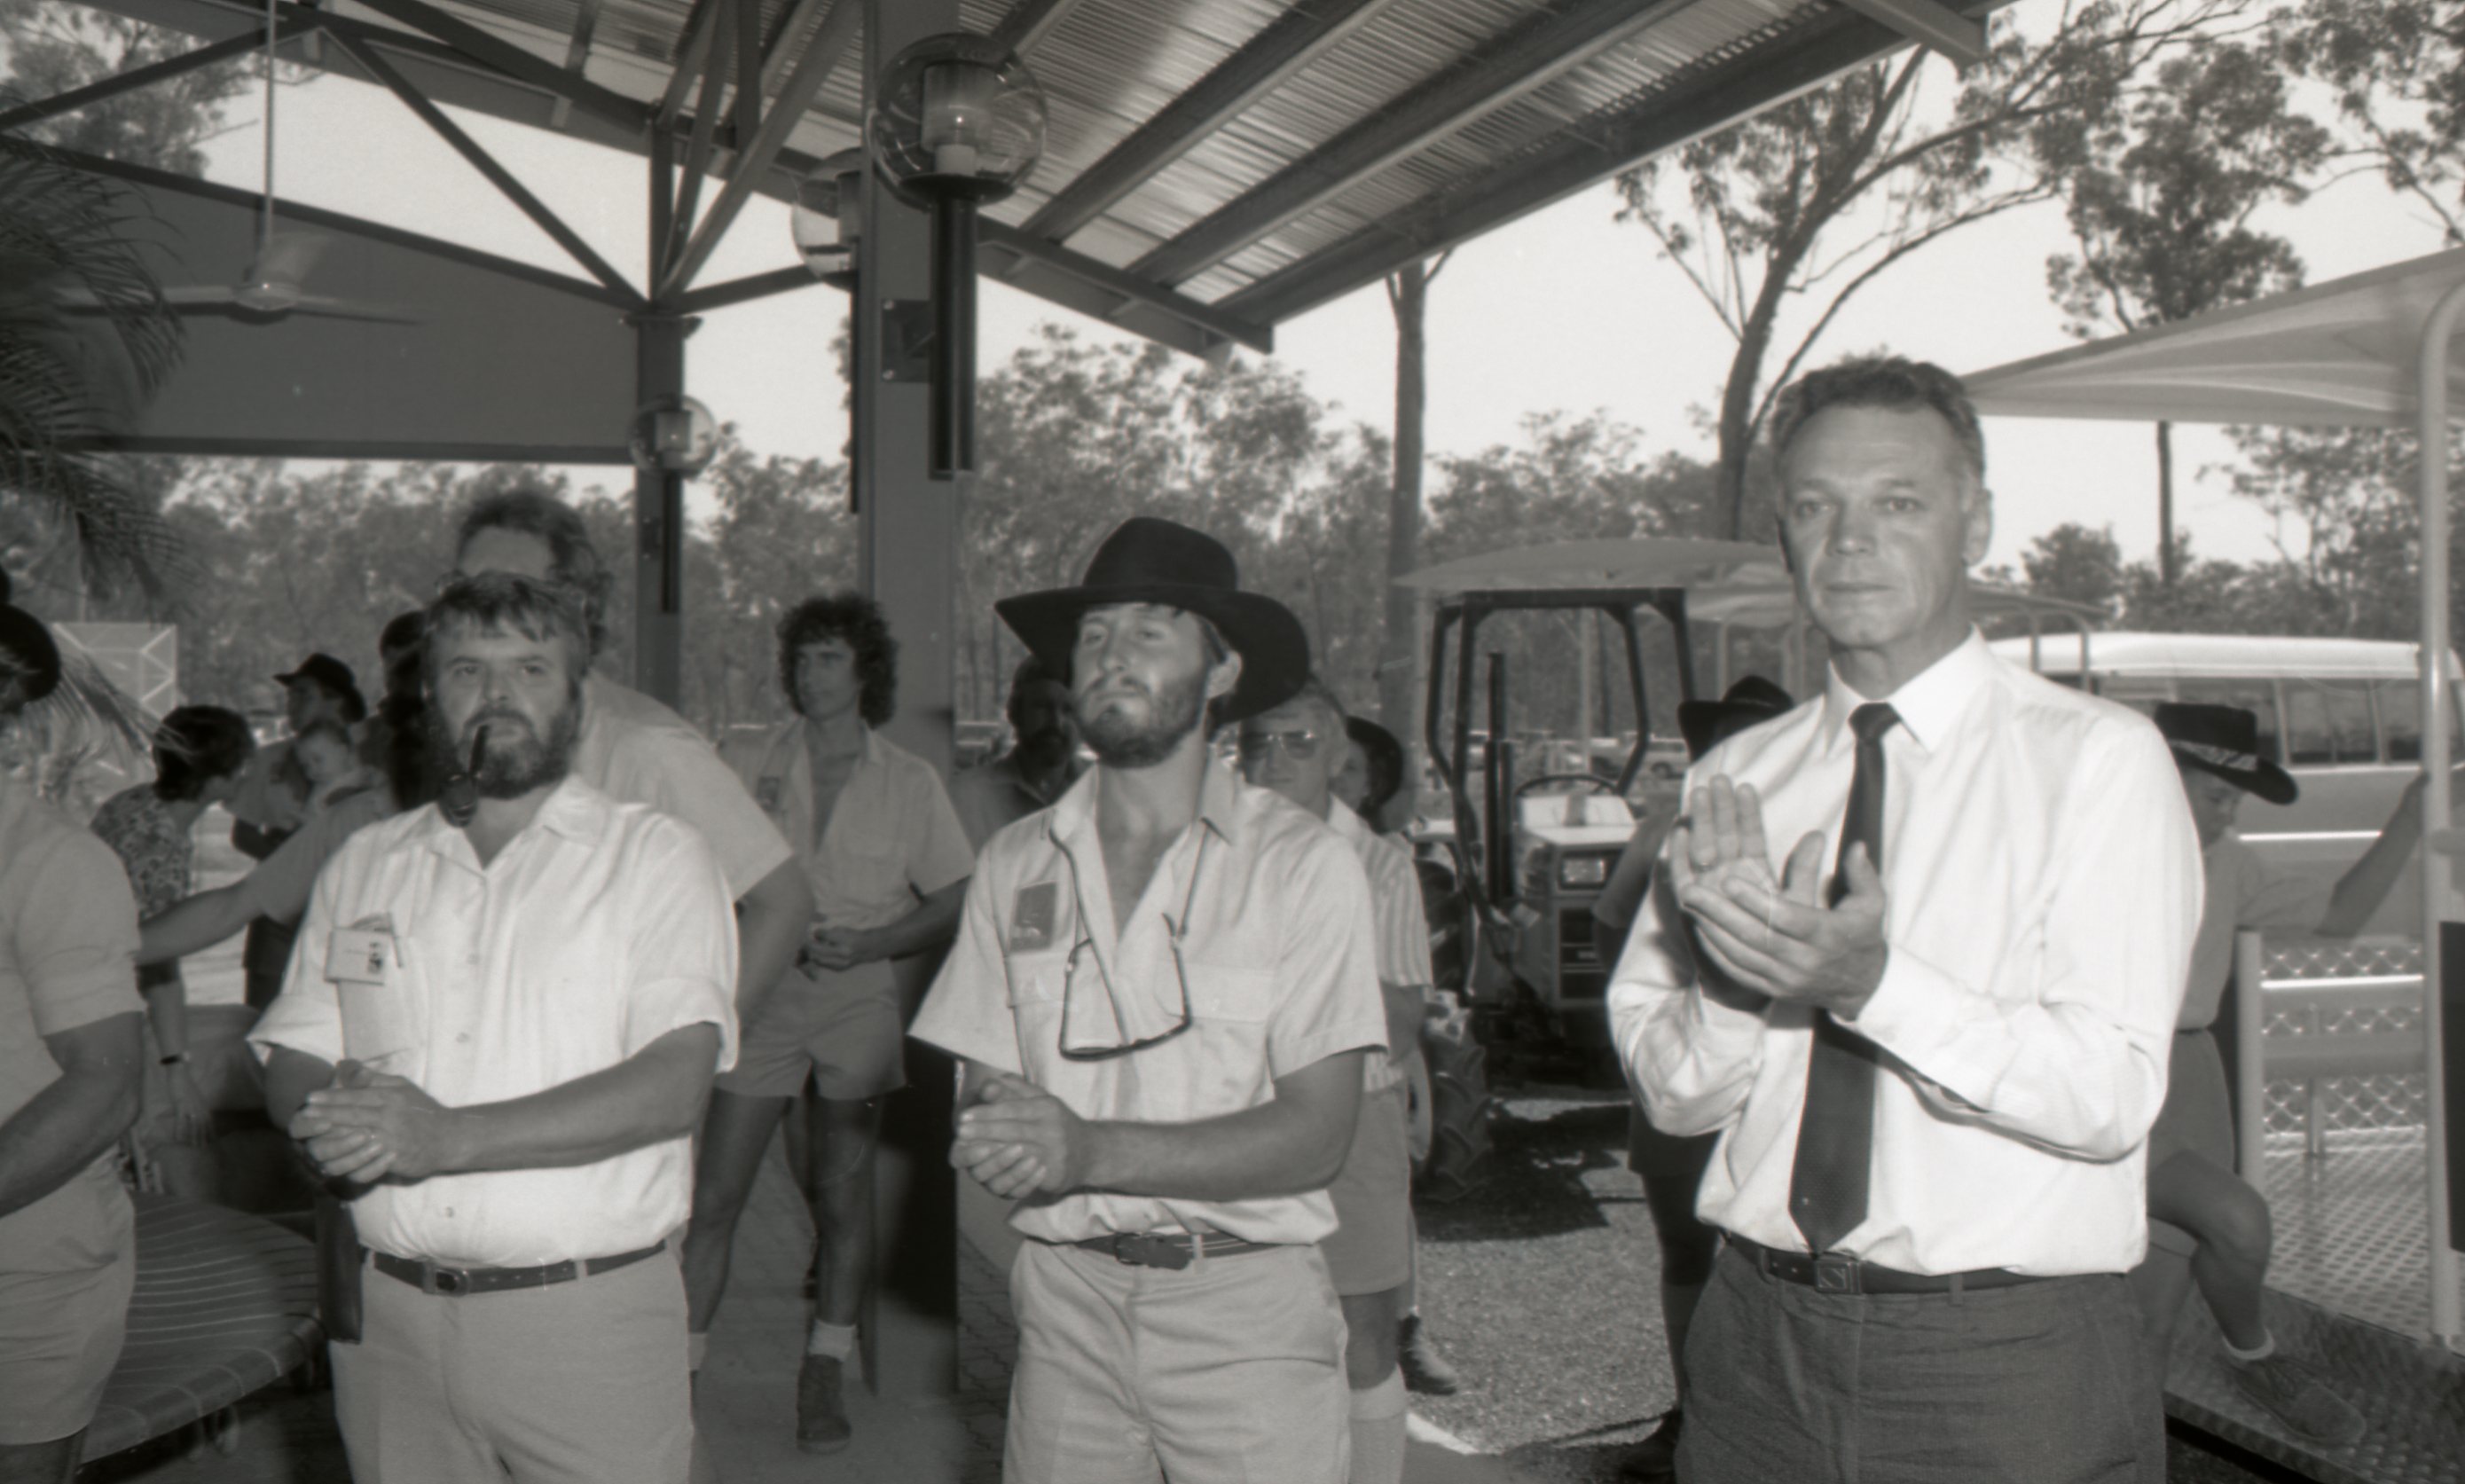 Minister Steve Hatton opens Berry Springs Wildlife Park, 28 September 1989<br />Image courtesy of Library & Archives NT,  Department of the Chief Minister, NTRS 3823 P1, Box 11, BW2855, Image 24